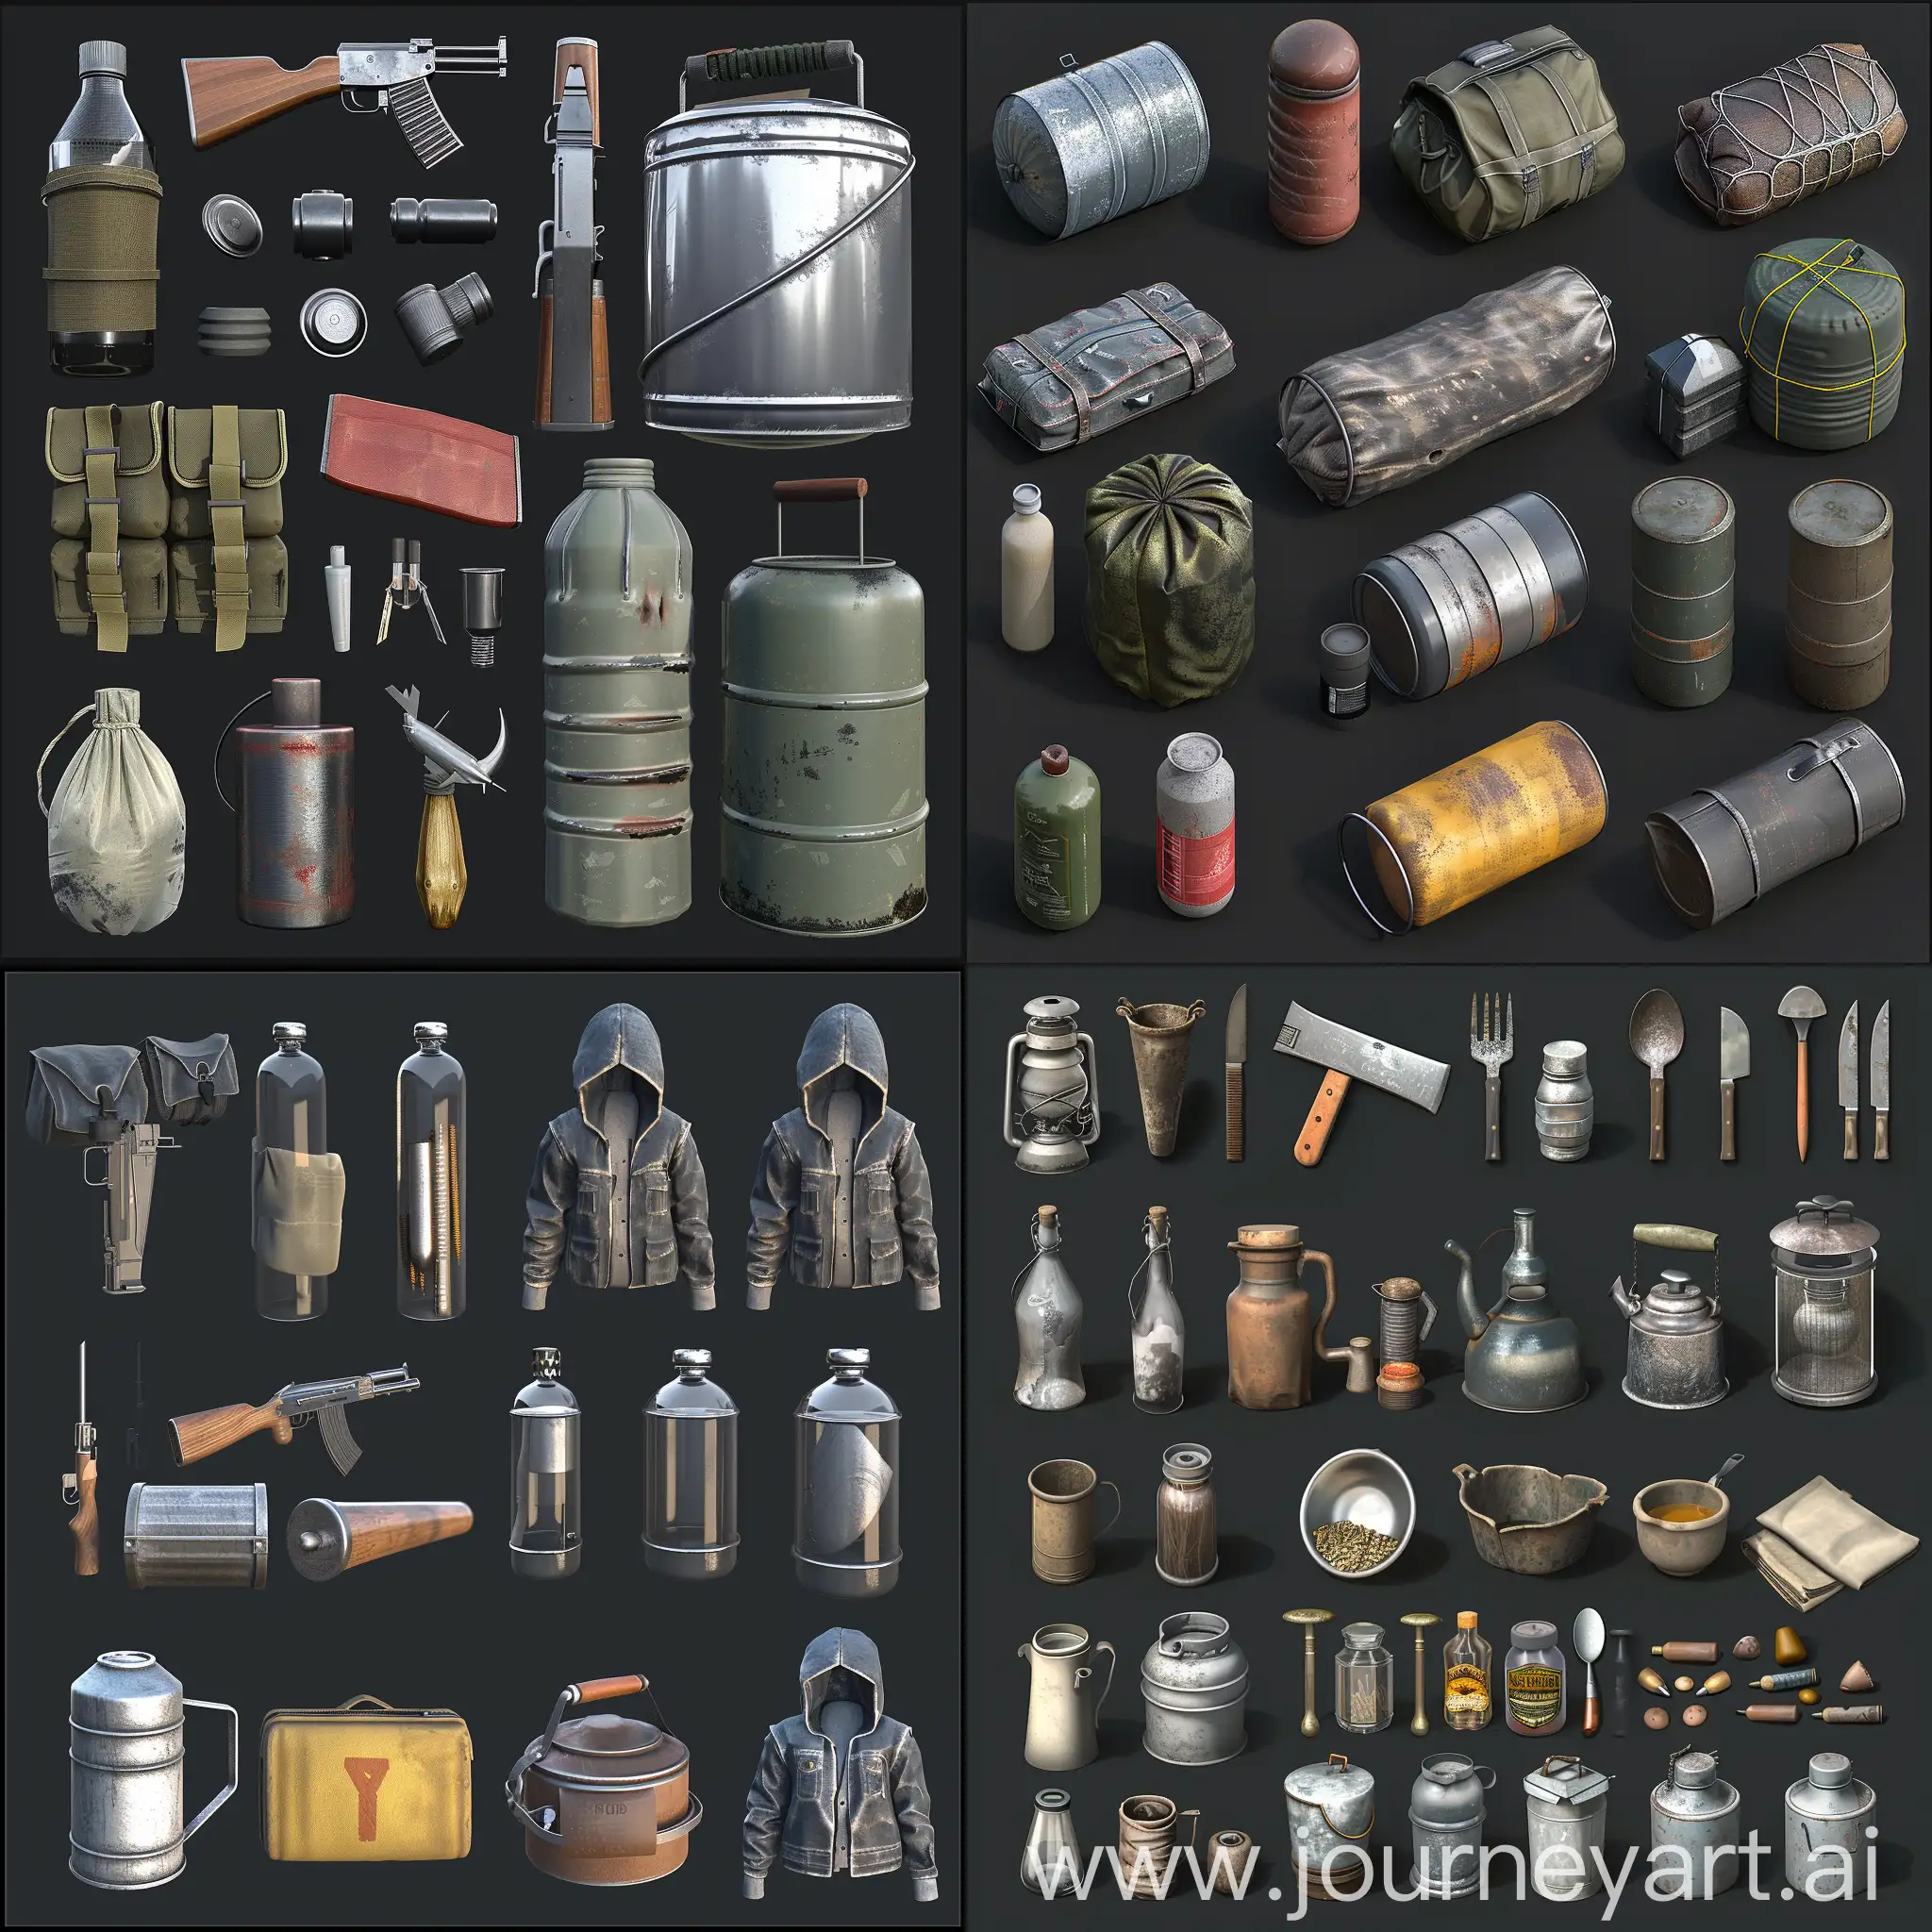 game assets for a game of survival zombie post apocalypse, survival items props are made in style of 3d blender high quality realistic 3d rendering, c4d, the various elements depicted in a realistic style with high resolution and attention to detail, all items are rendered in style of volumetric 3d object, on black background, items set, made in style of dayz stalker items props --chaos 30 --sref https://i.postimg.cc/jqPQCsxt/in-process.png https://i.postimg.cc/1zj2KMMk/image.png https://i.postimg.cc/J0D91g78/2024-04-05-044759707.png https://i.postimg.cc/3Ry5Mzdr/2024-05-05-151227005.png